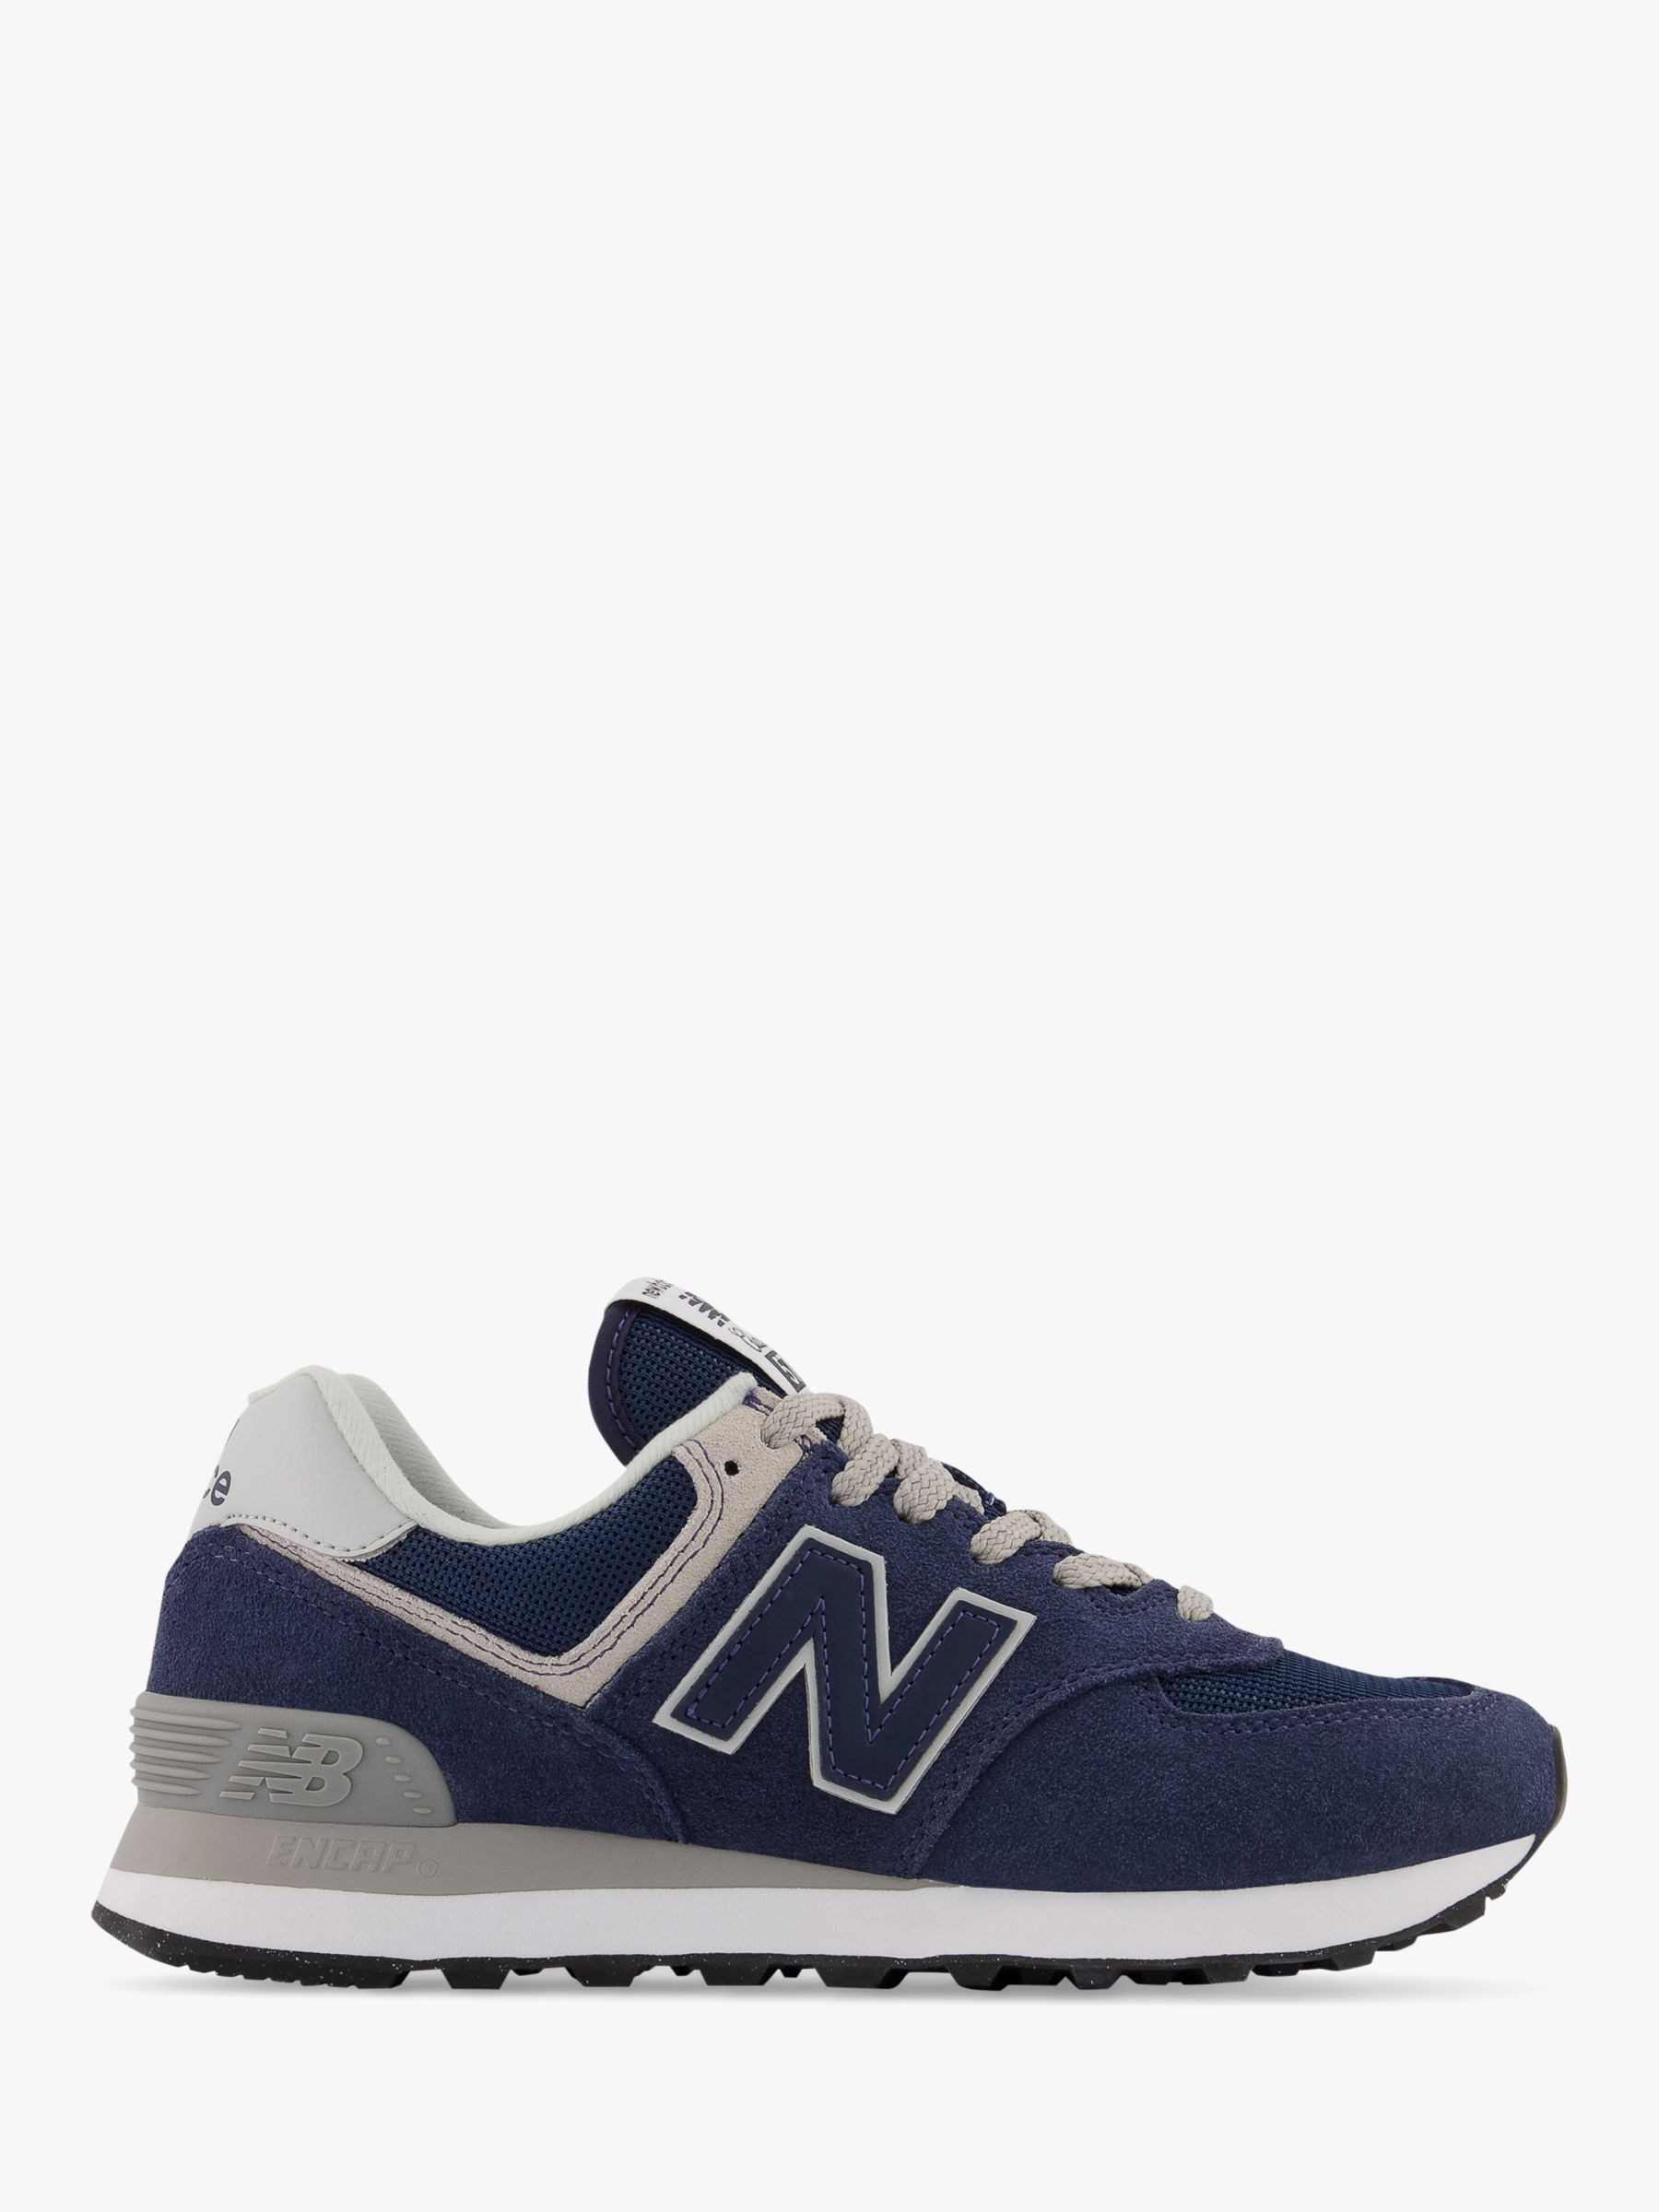 New Balance 574v3 Trainers, Navy/White at John Lewis & Partners